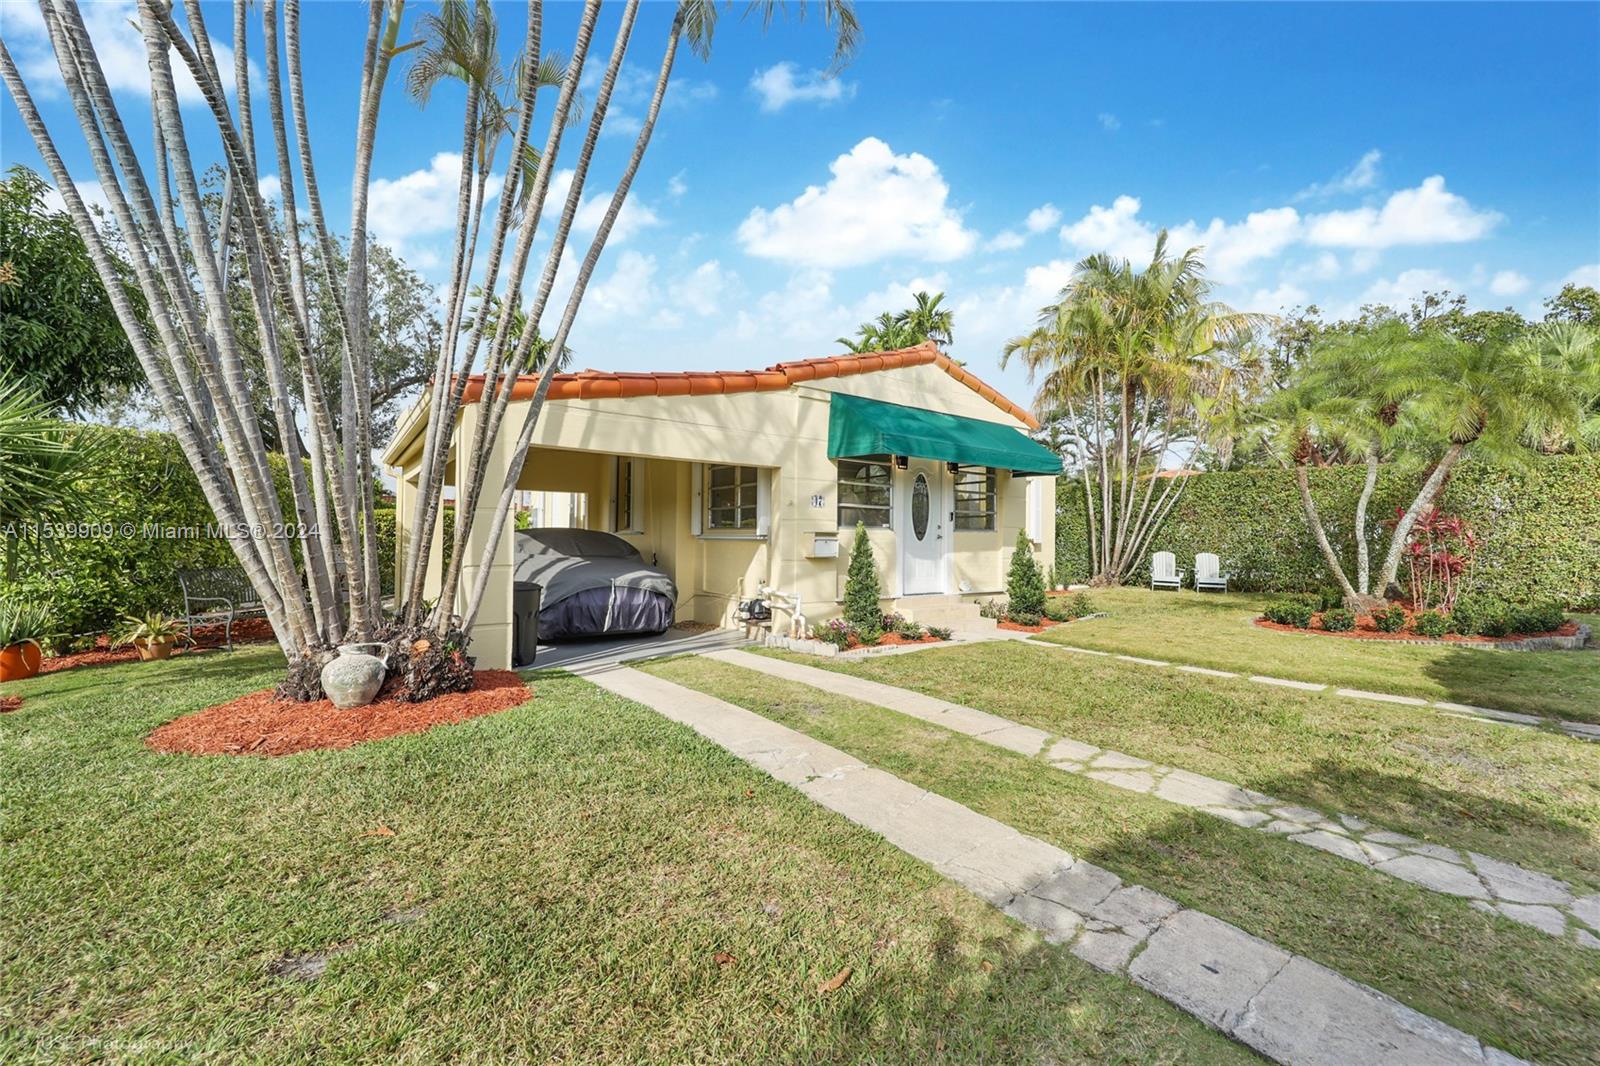 Beautiful one-story home with 3 bedrooms and 2 baths, located on a wide street in Coral Gables. House has a mix of Spanish porcelain tile and original oak hardwood floors, adding charm to this renovated home. Master bedroom is large and includes a walk in closet. Owner requesting to keep dining room chandelier (negotiable).Living square footage larger as per owner.